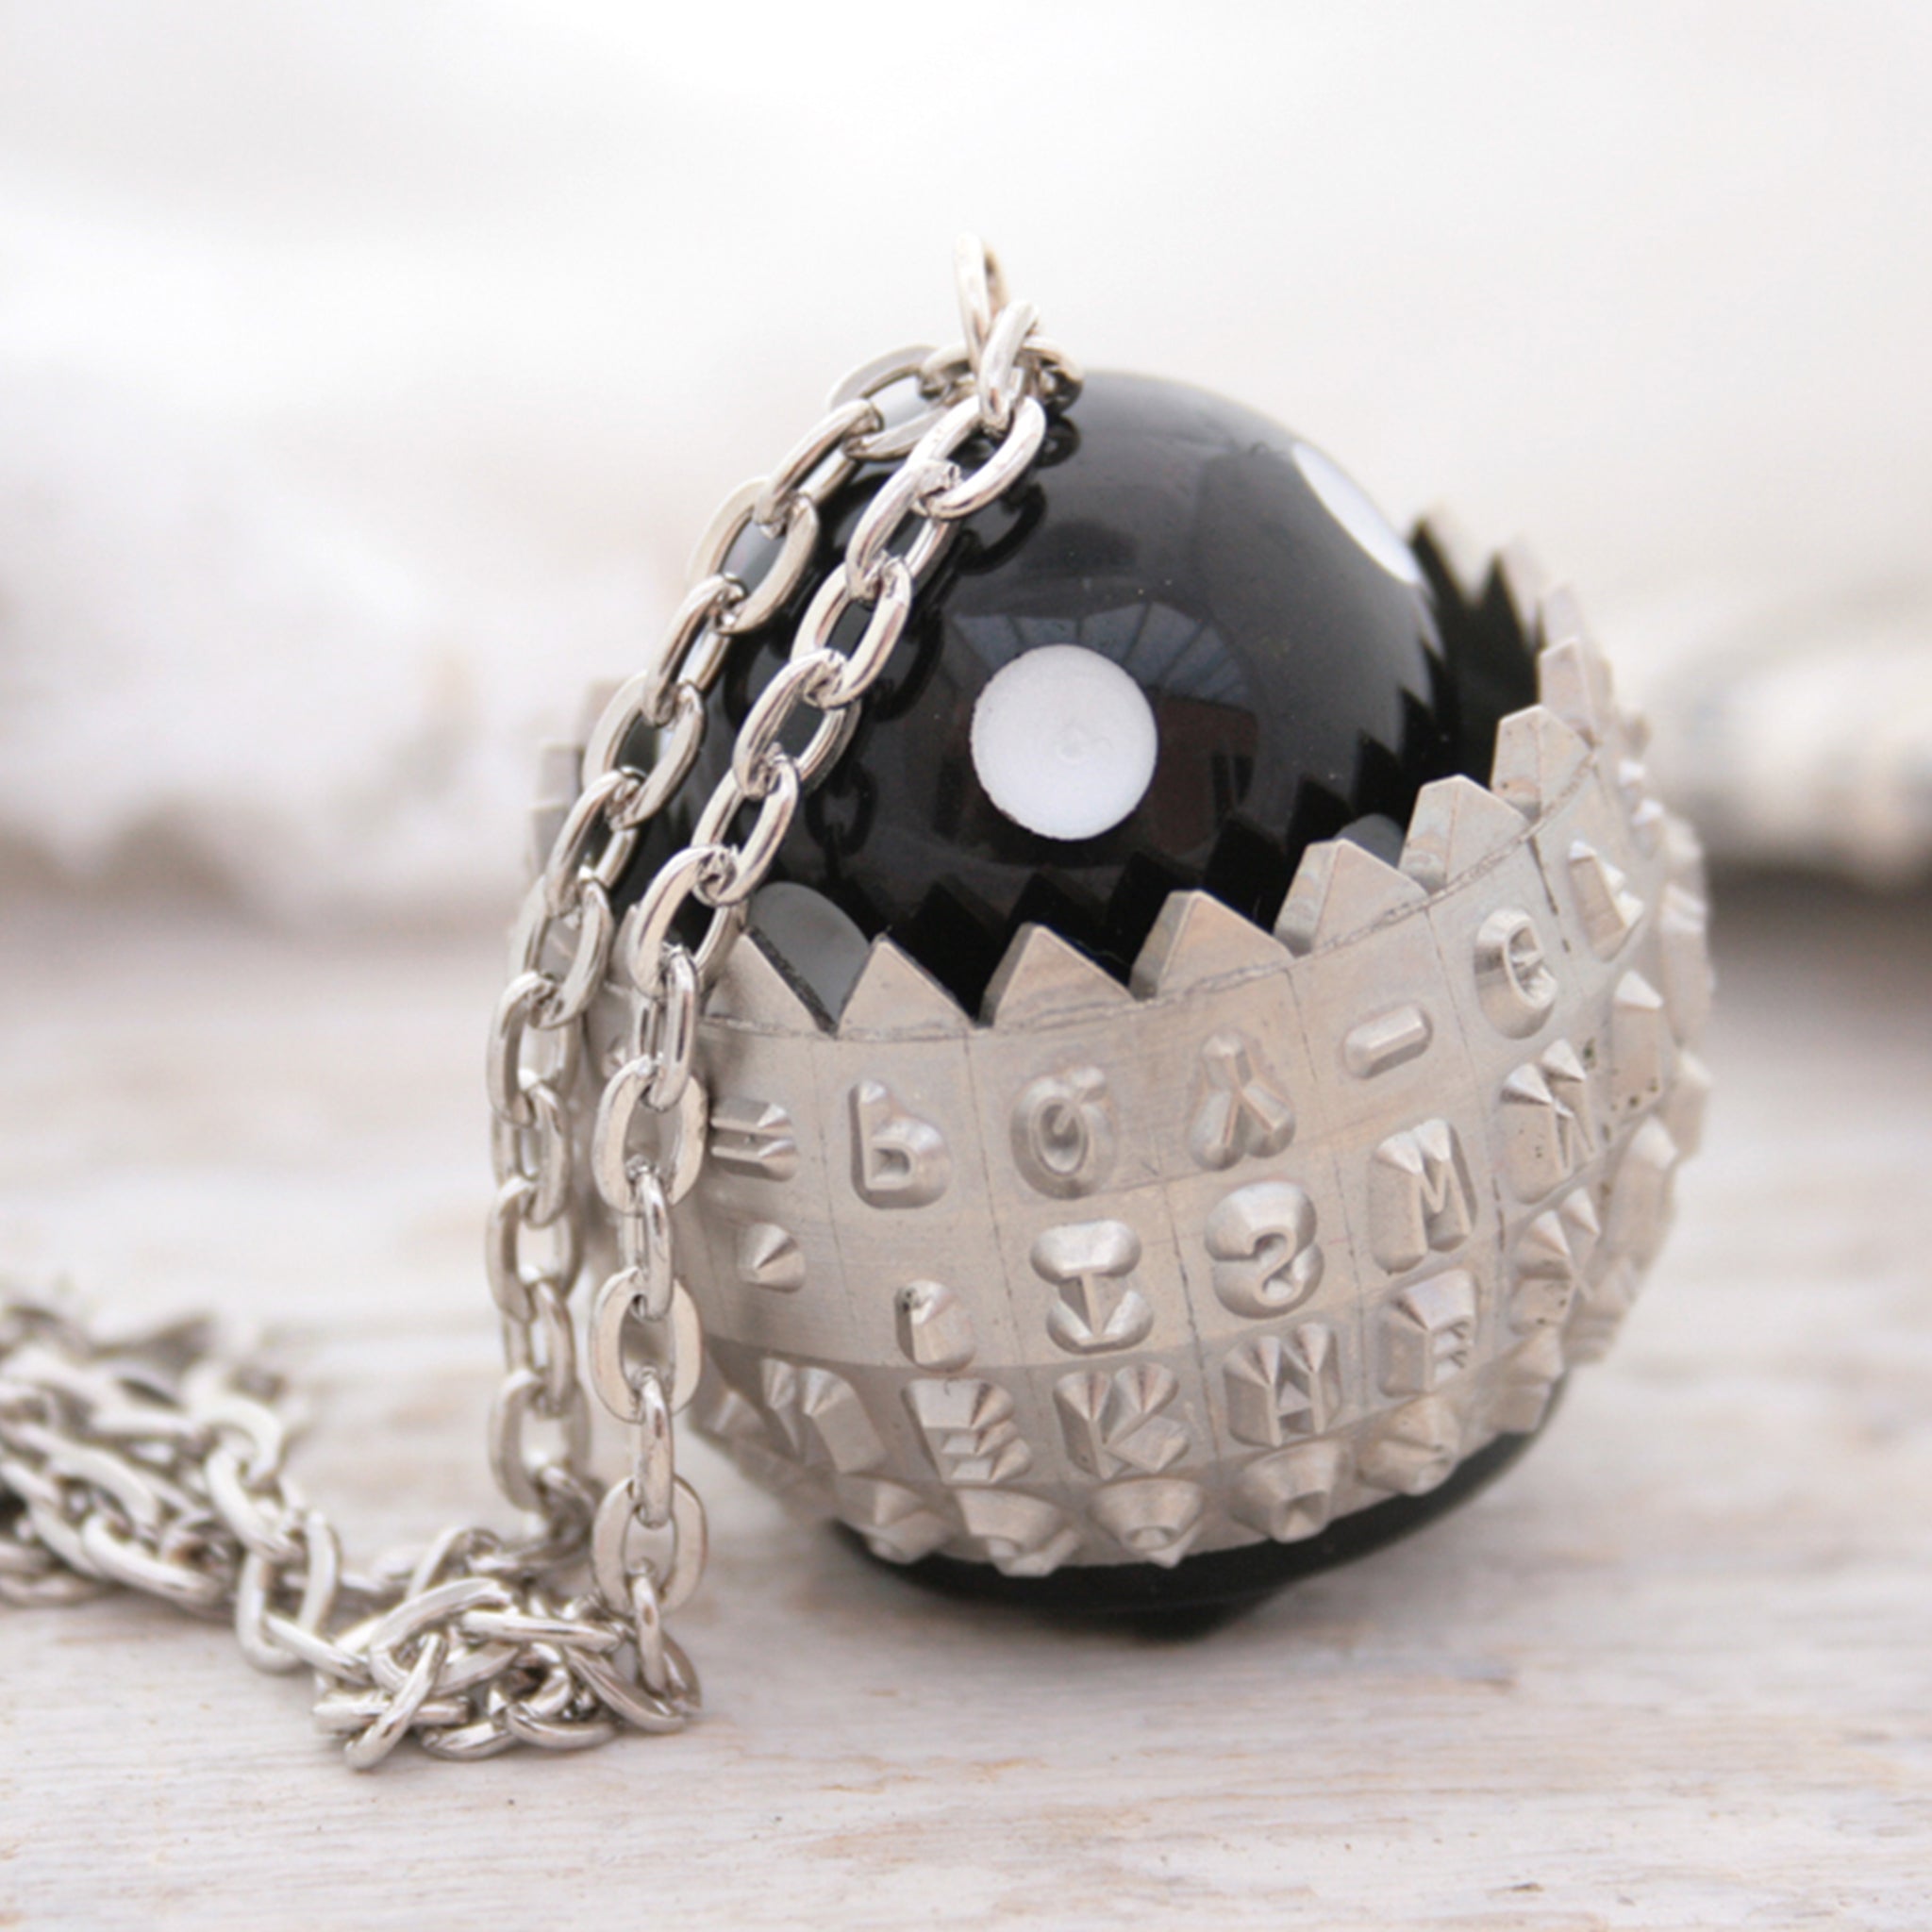  IBM Selectric typewriter font ball with large black and white bead turned into a necklace